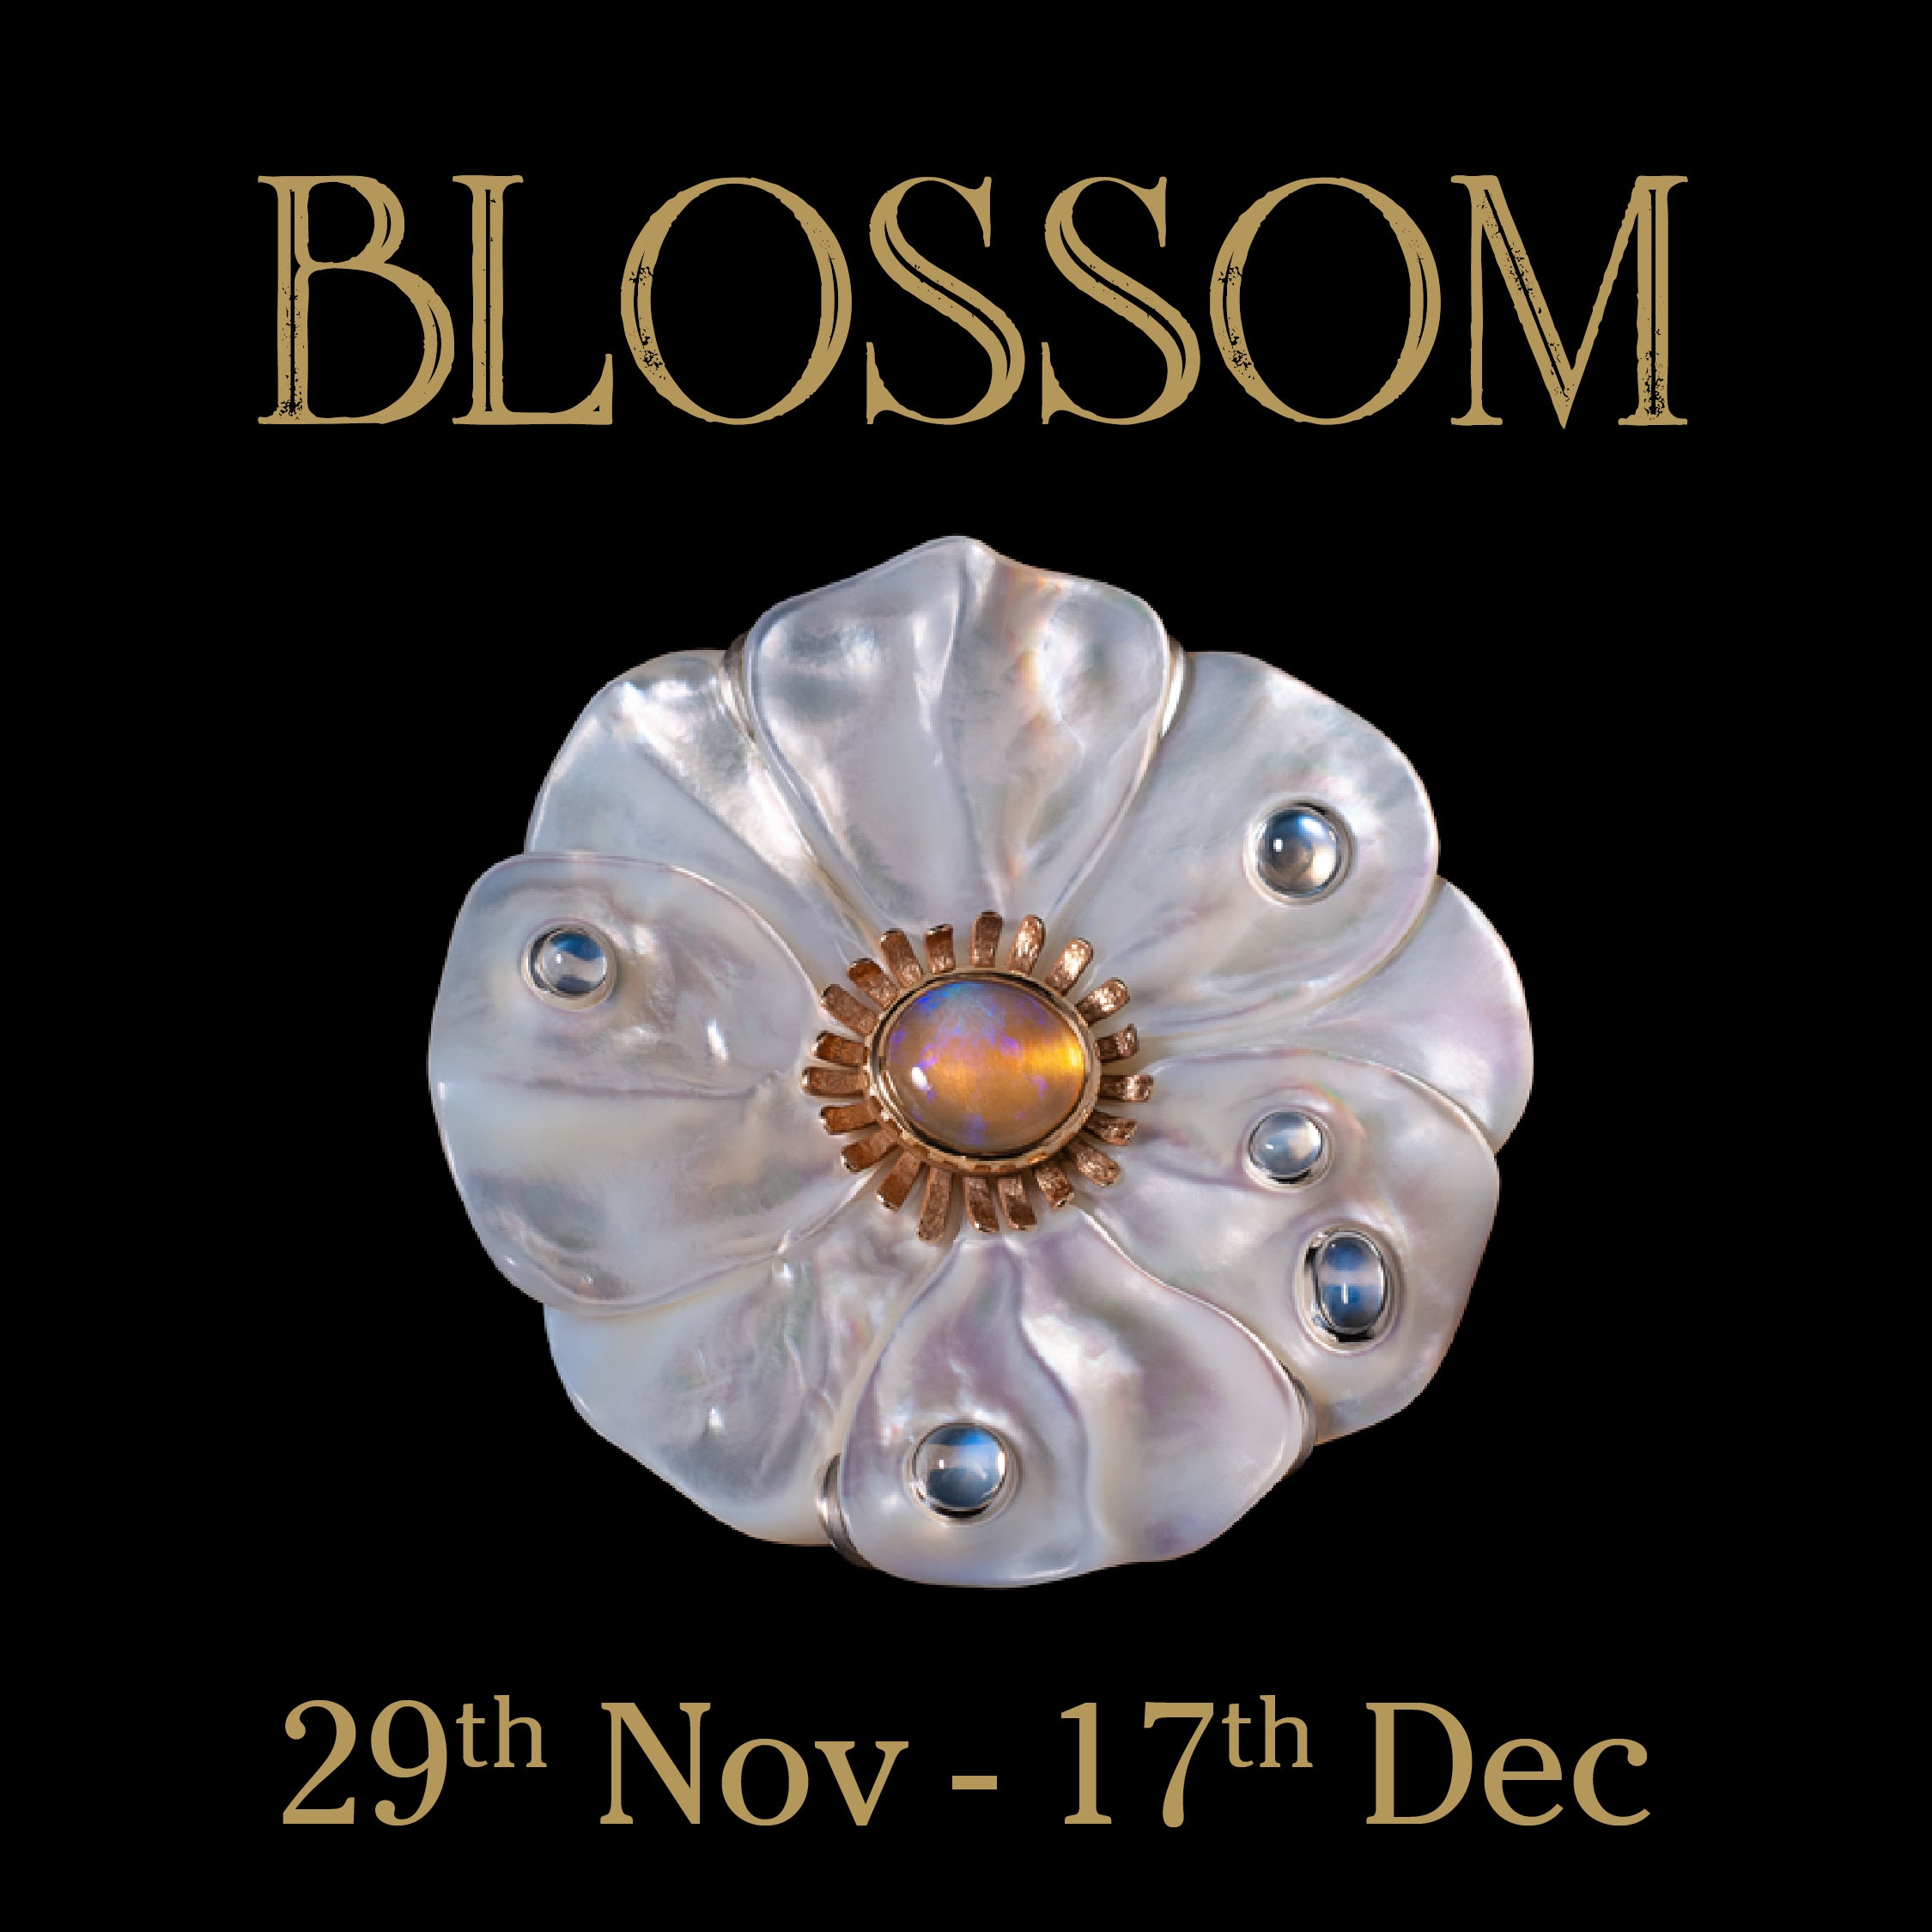 BLOSSOM - Solo Exhibition by Steph Lusted